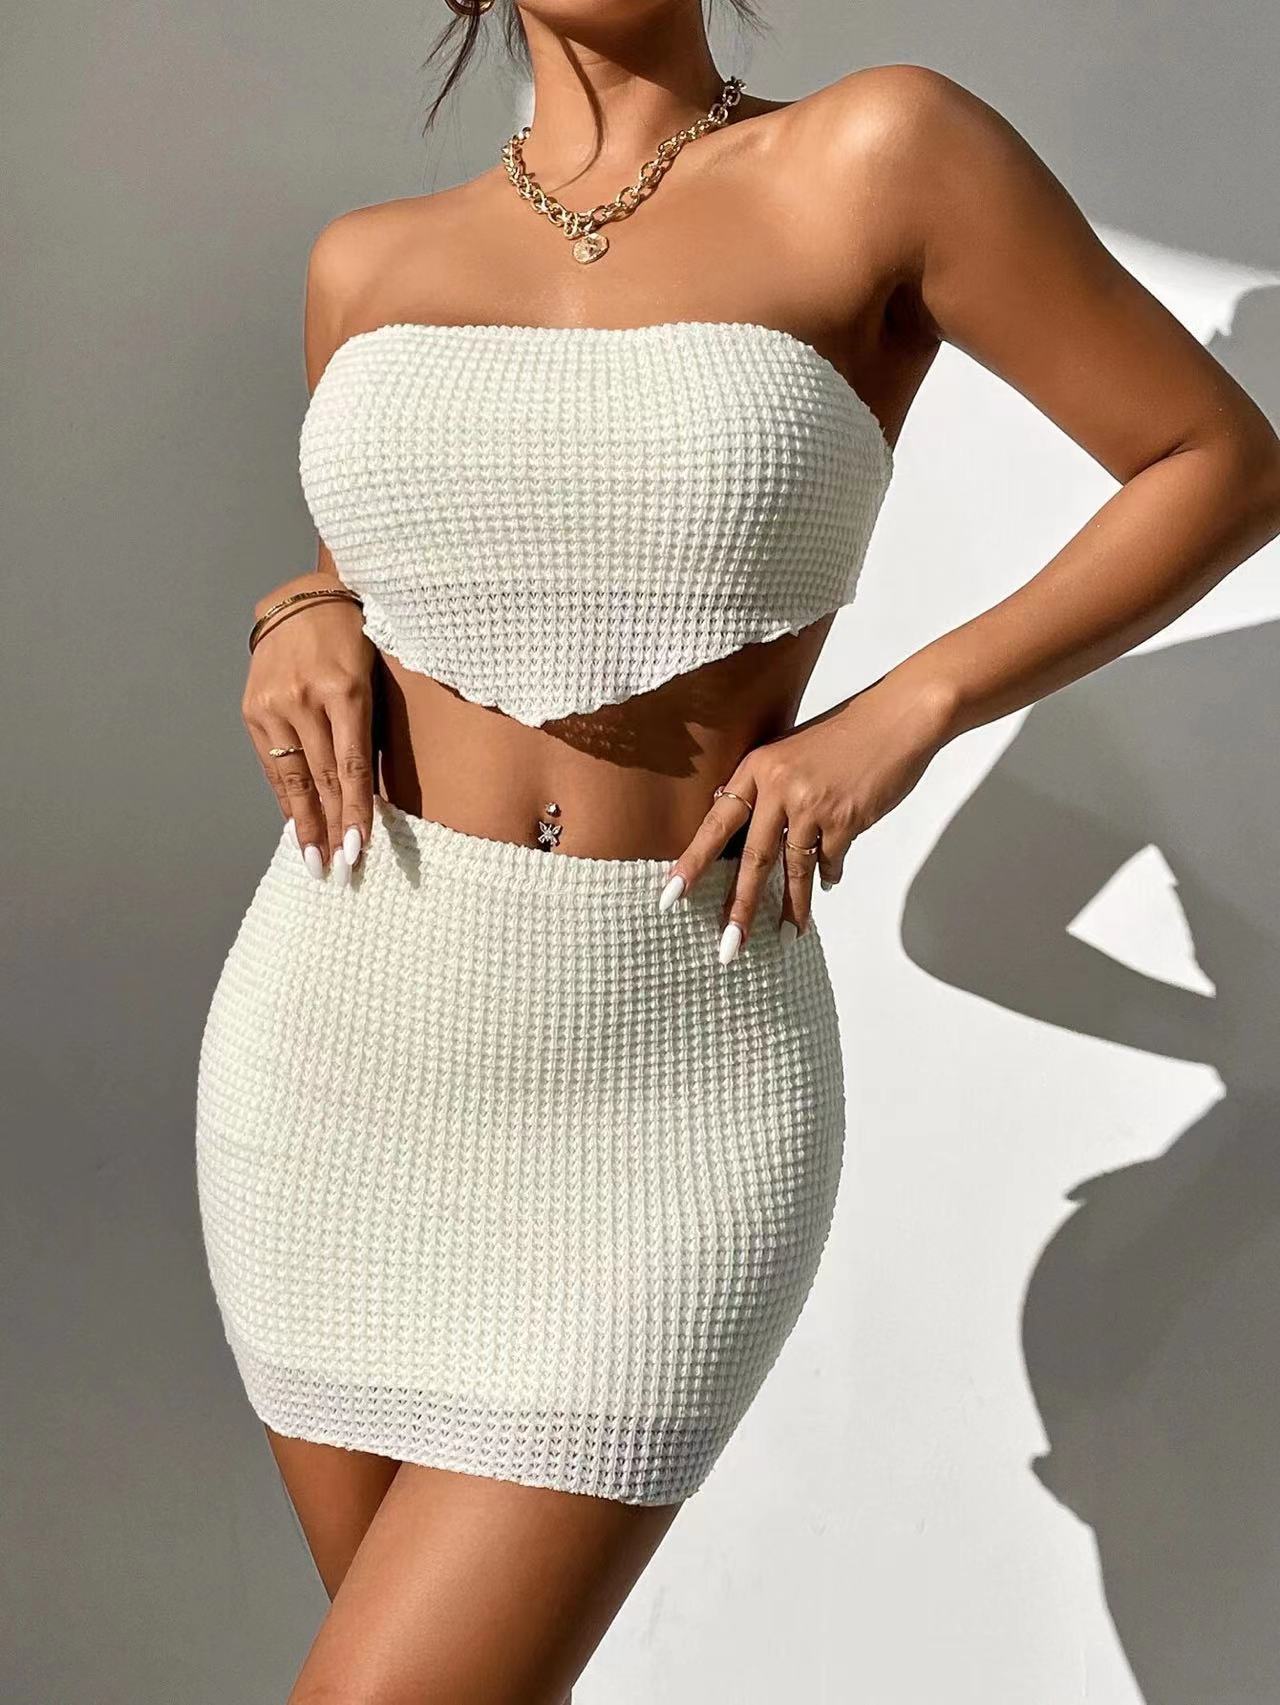 Woman showcasing the VivaraEssence Pearl Radiance Bandeau and Skirt Set in white, featuring a textured pattern.